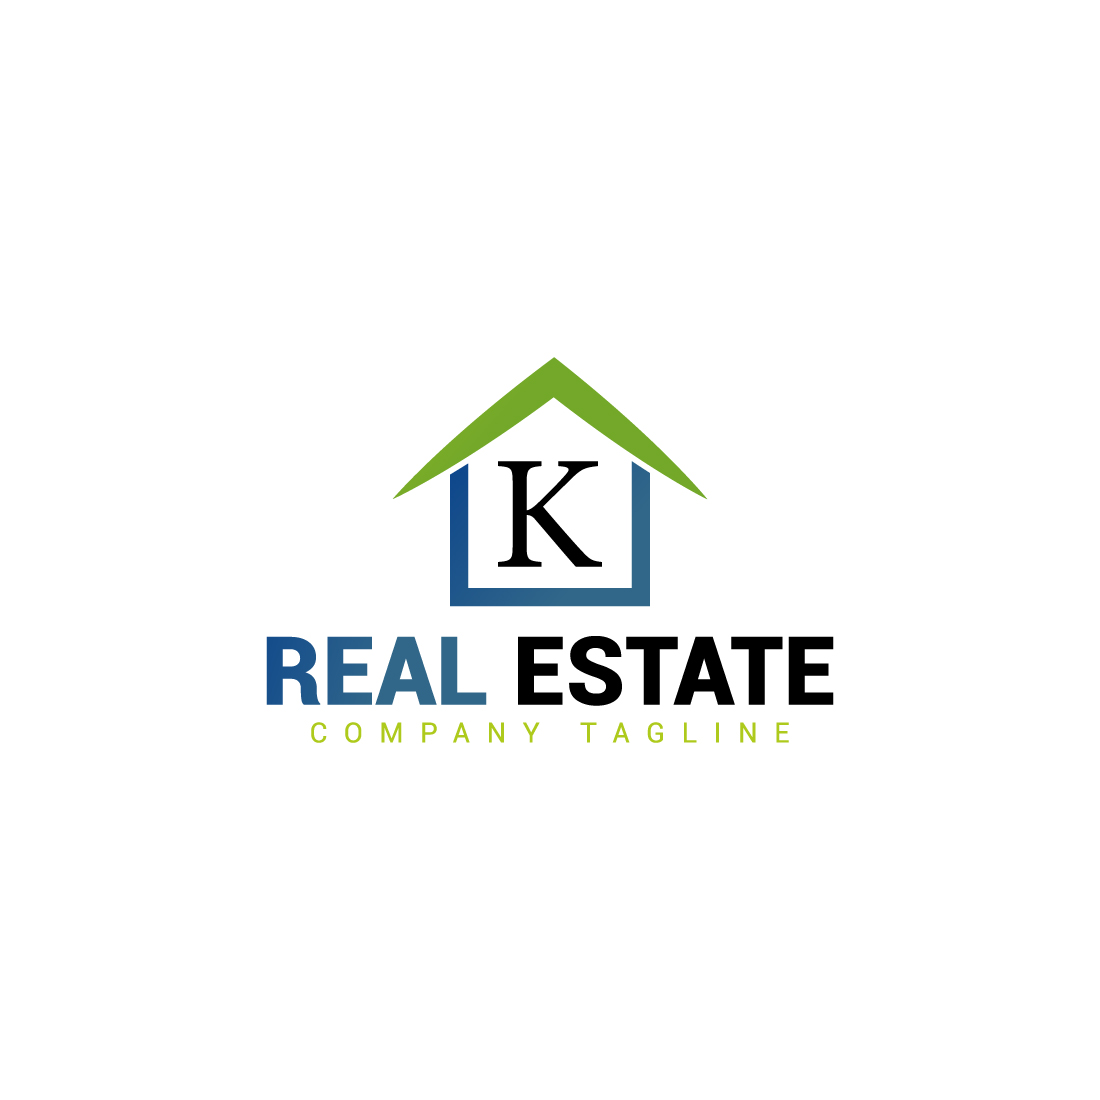 Real estate logo with green, dark blue color and K letter cover image.